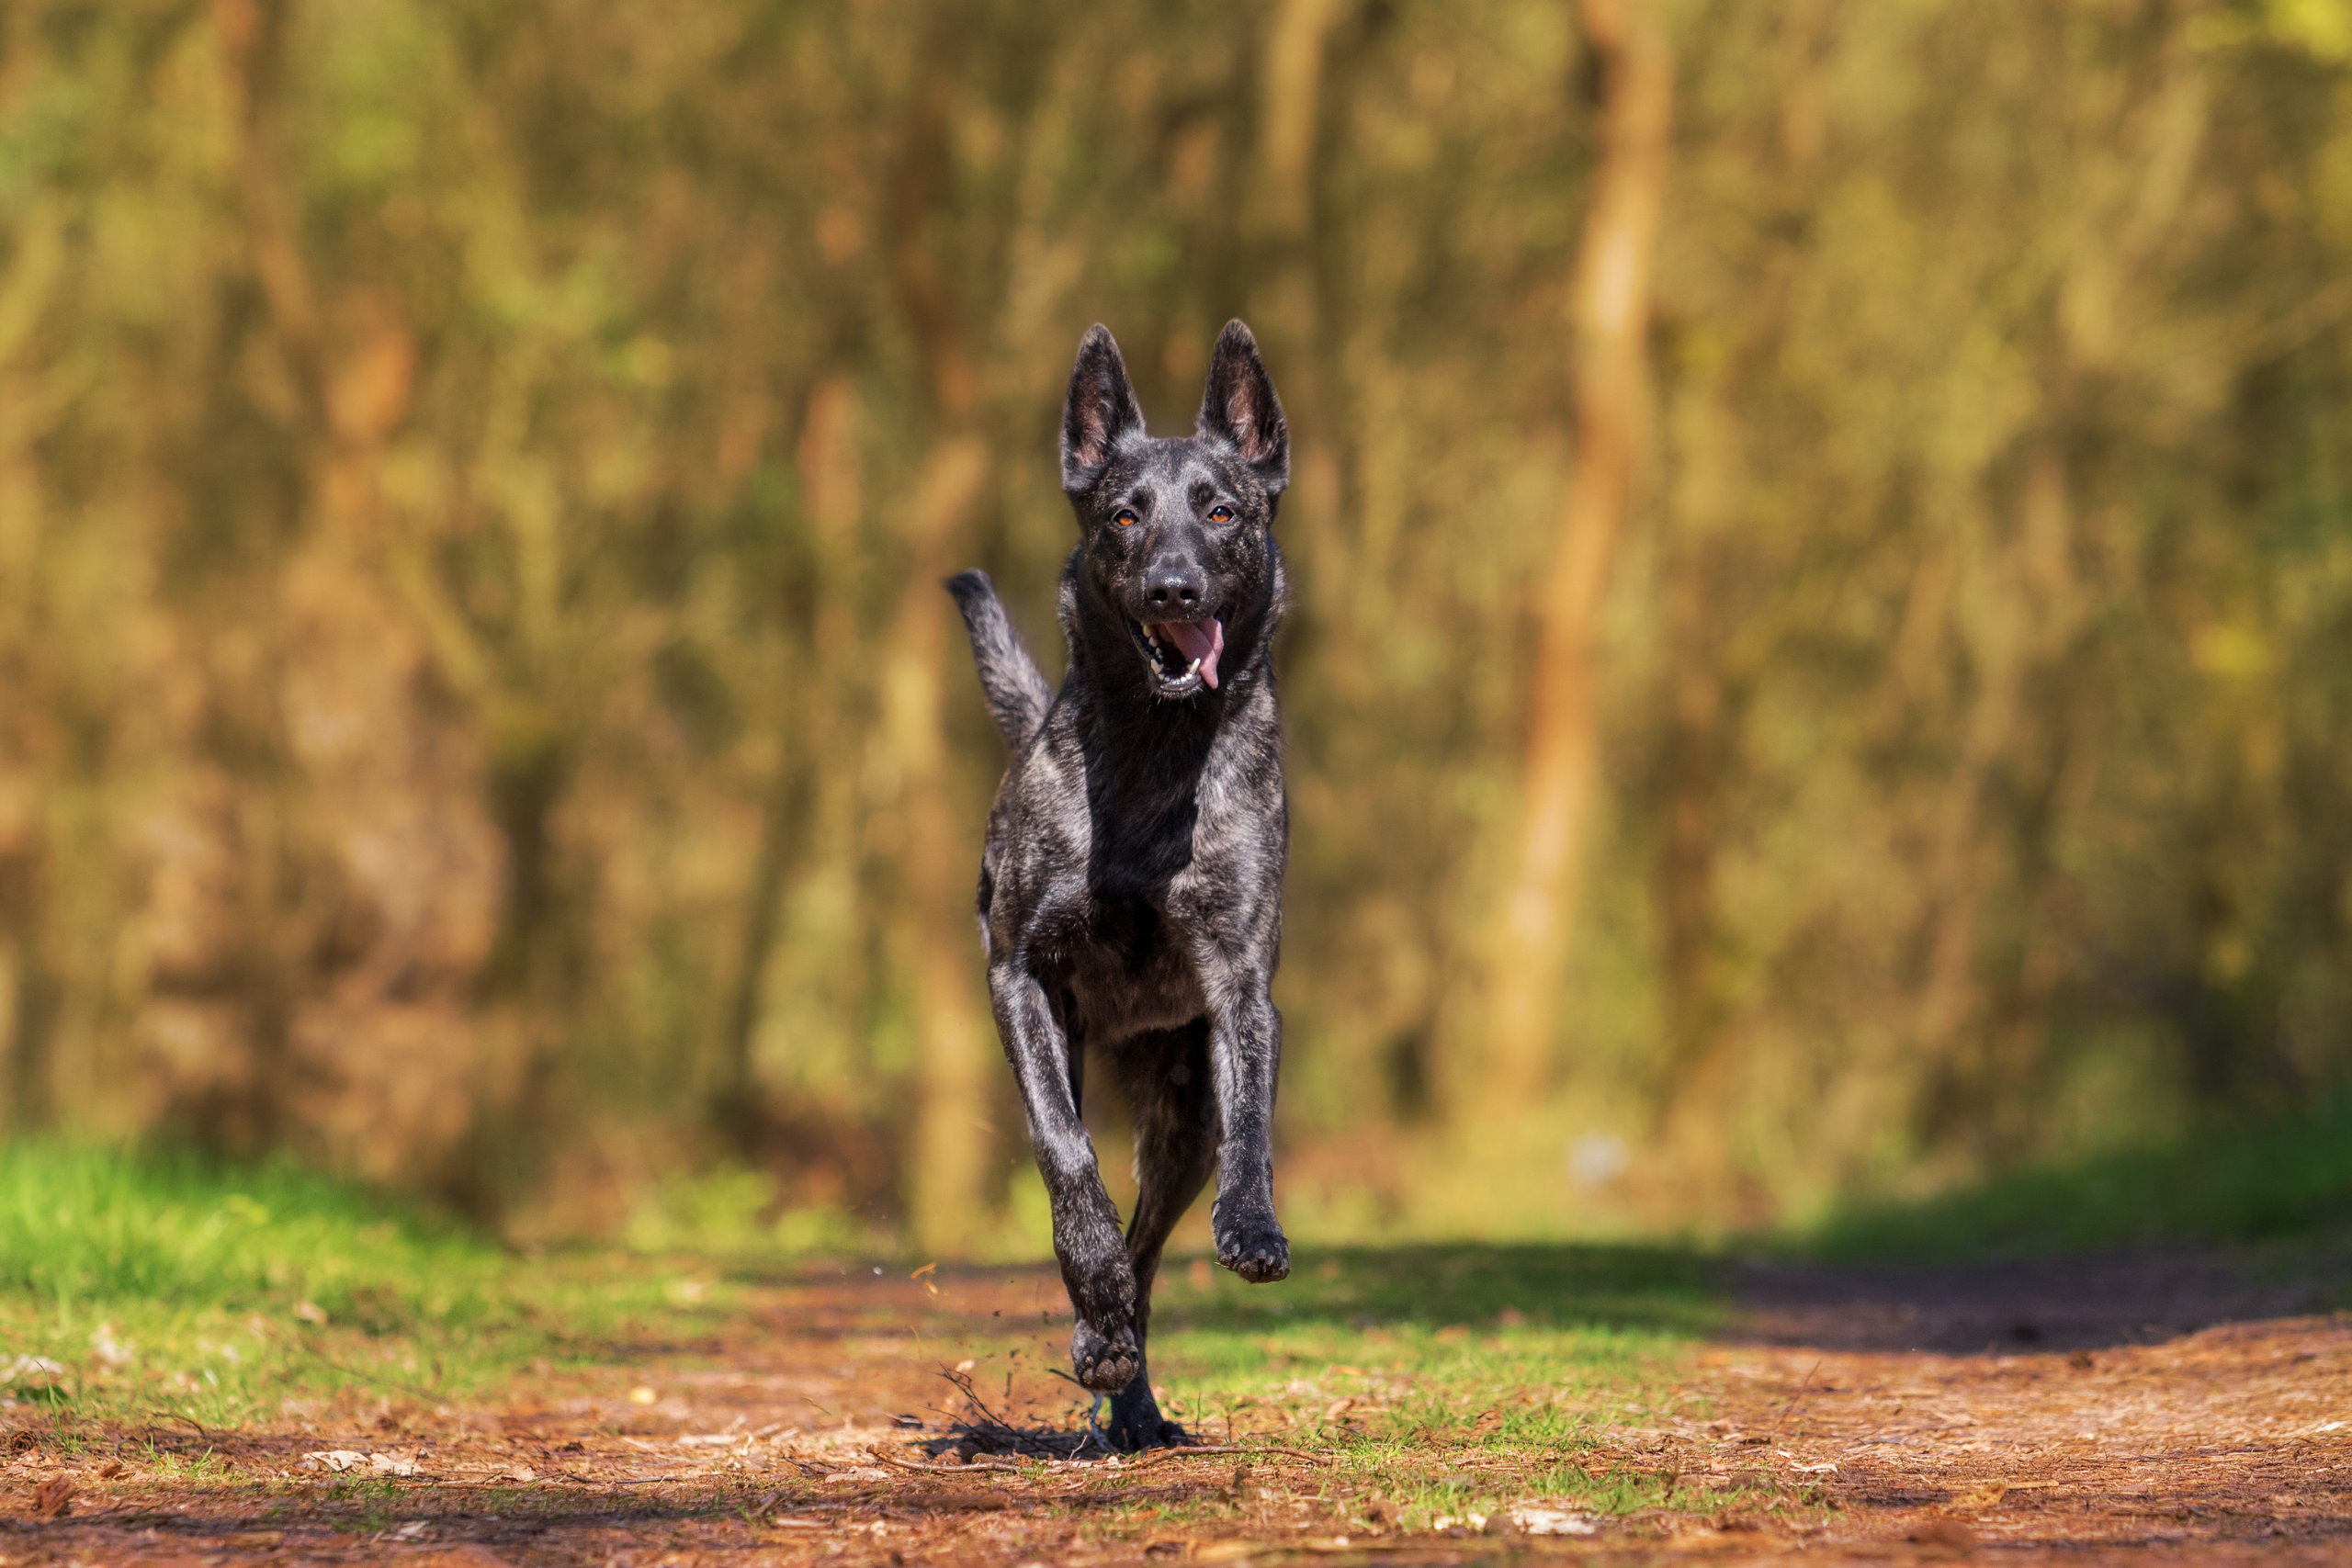 A joyful black dog running towards the camera on a forest trail with its tongue out, illustrating the unpredictability of dogs' behavior and the potential for dog bite injuries, emphasizing the need for awareness and the right to seek compensation if injured.